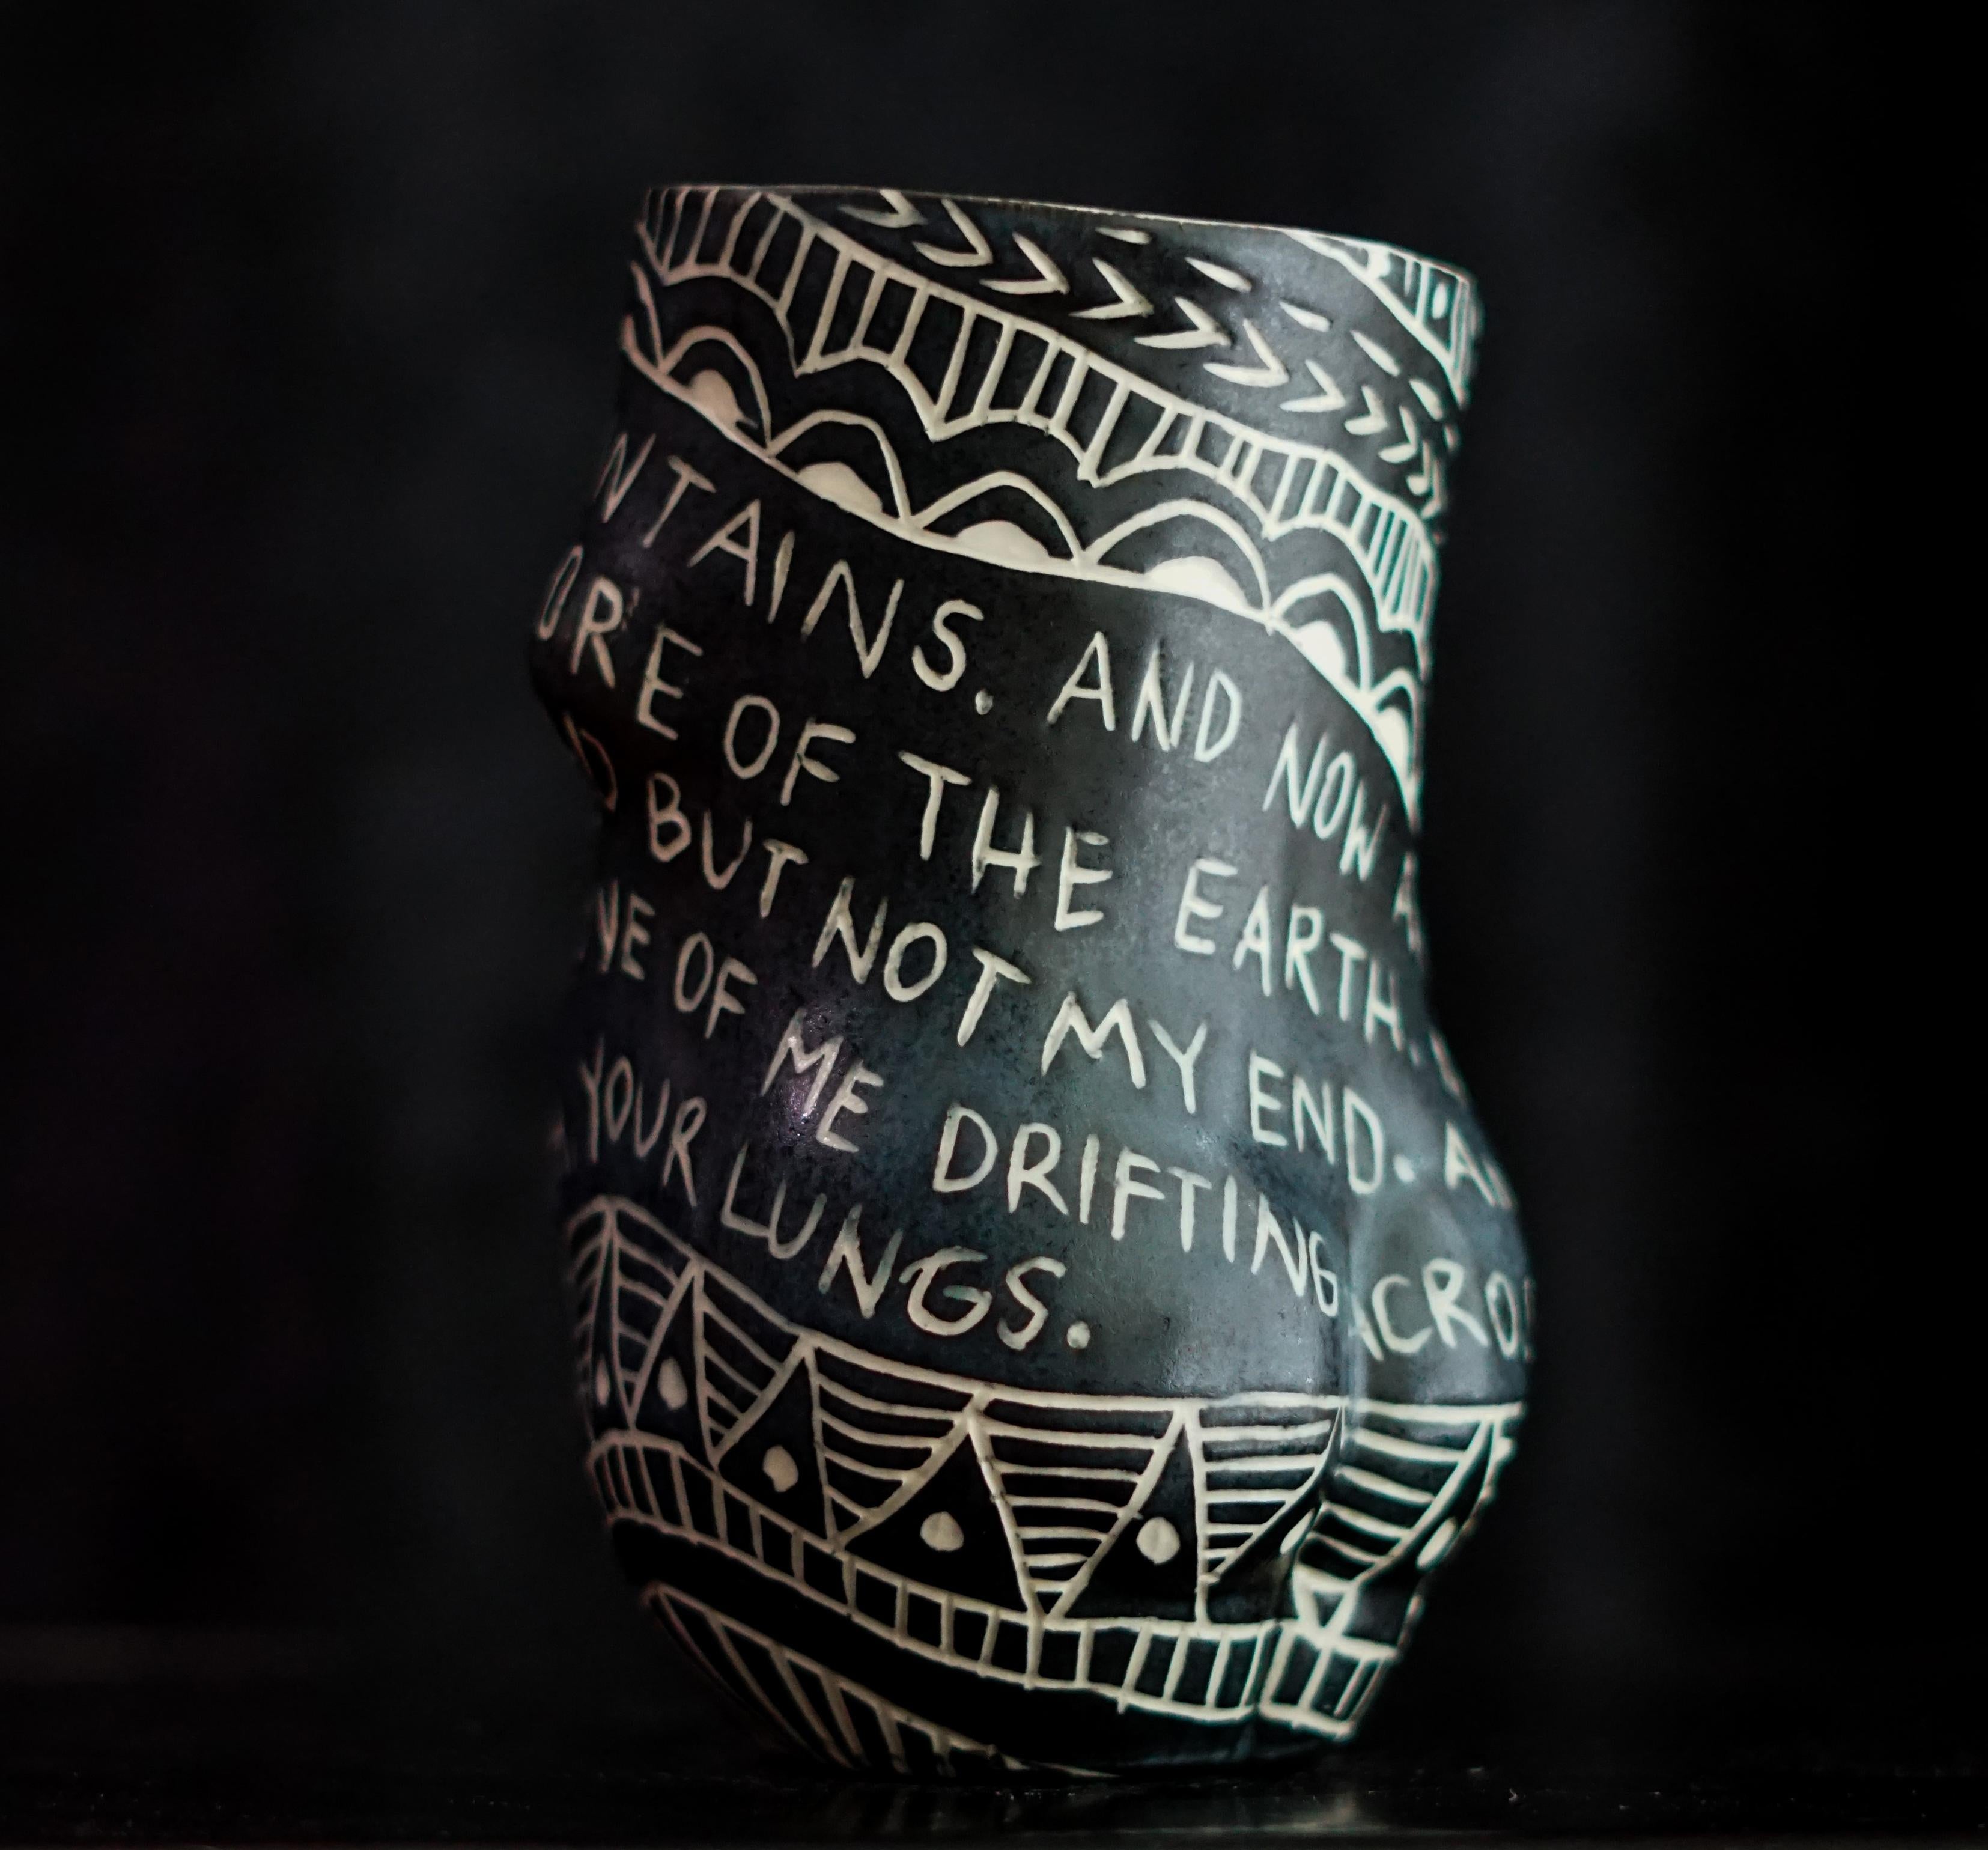 “We had been Mountains...” Porcelain cup with sgraffito detailing - Modern Sculpture by Alex Hodge